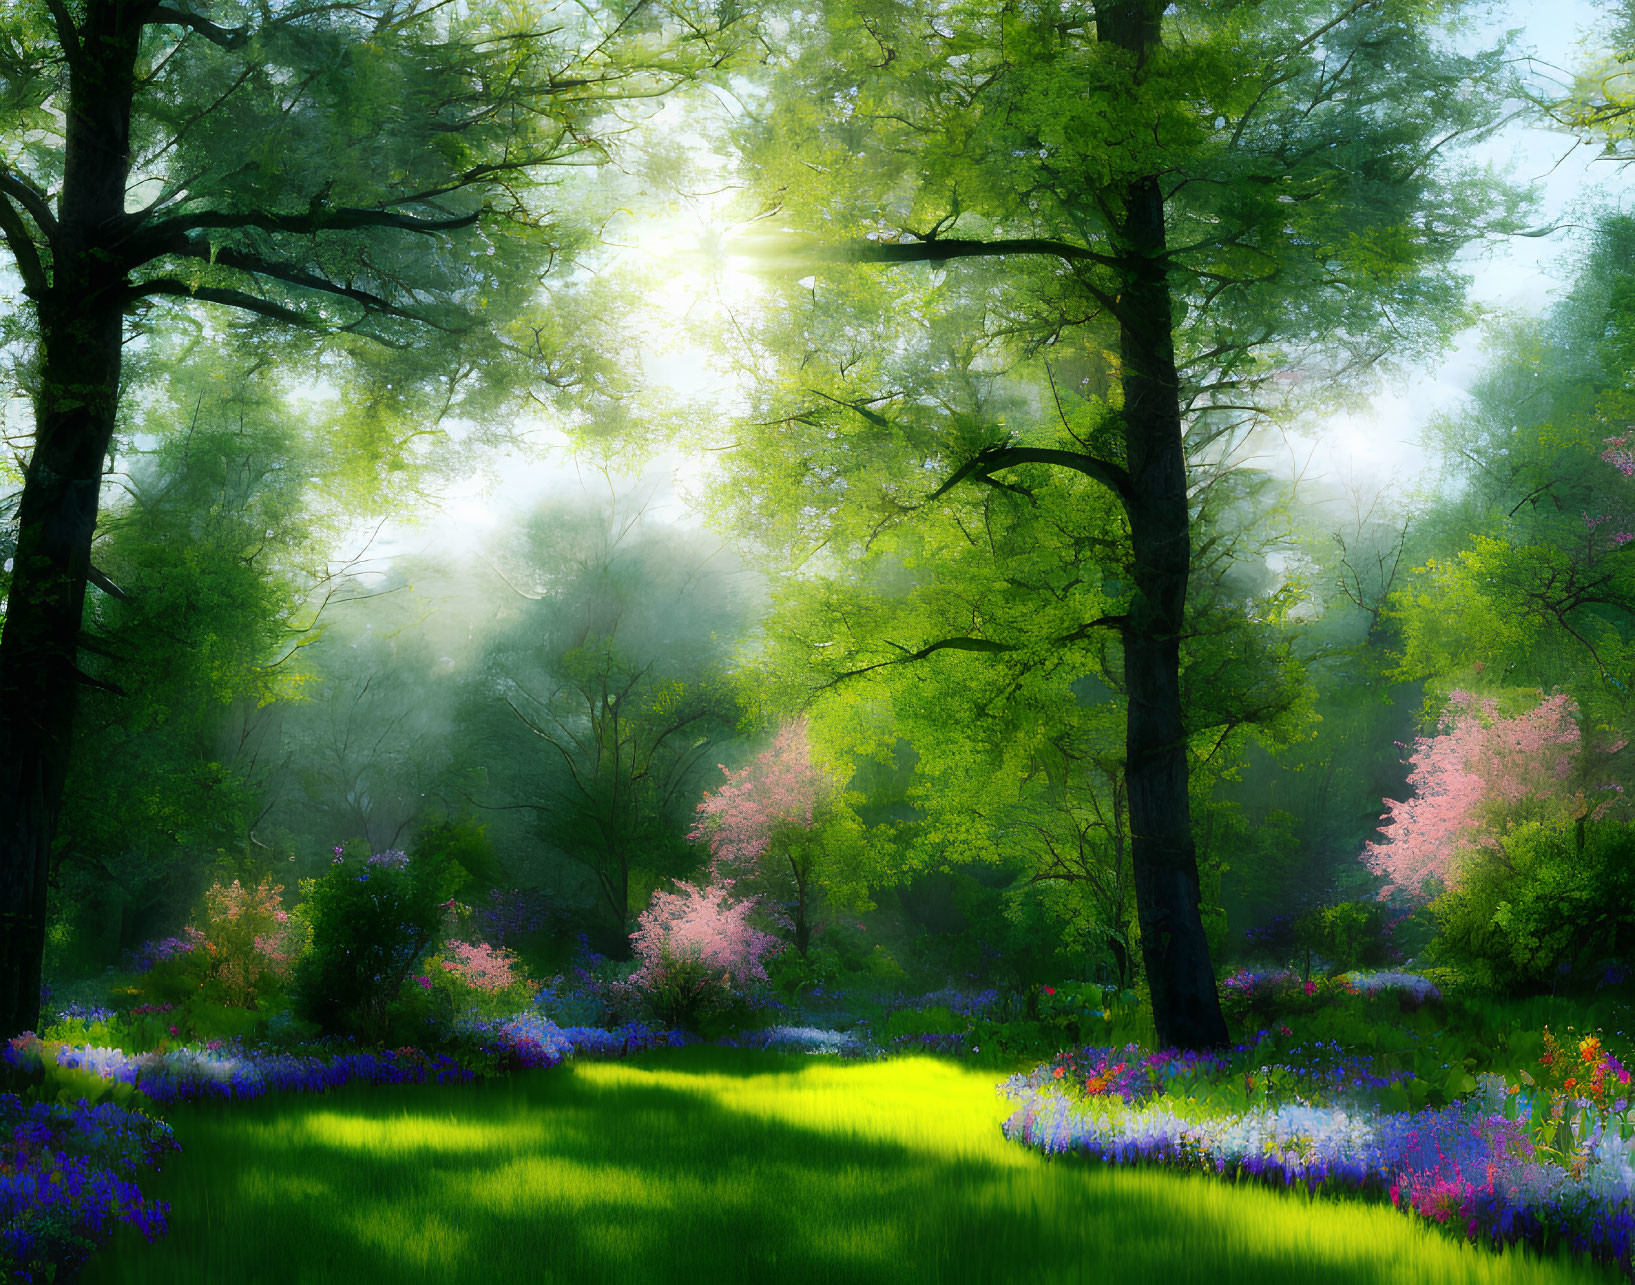 Sunlit forest glade with vibrant wildflowers and misty trees